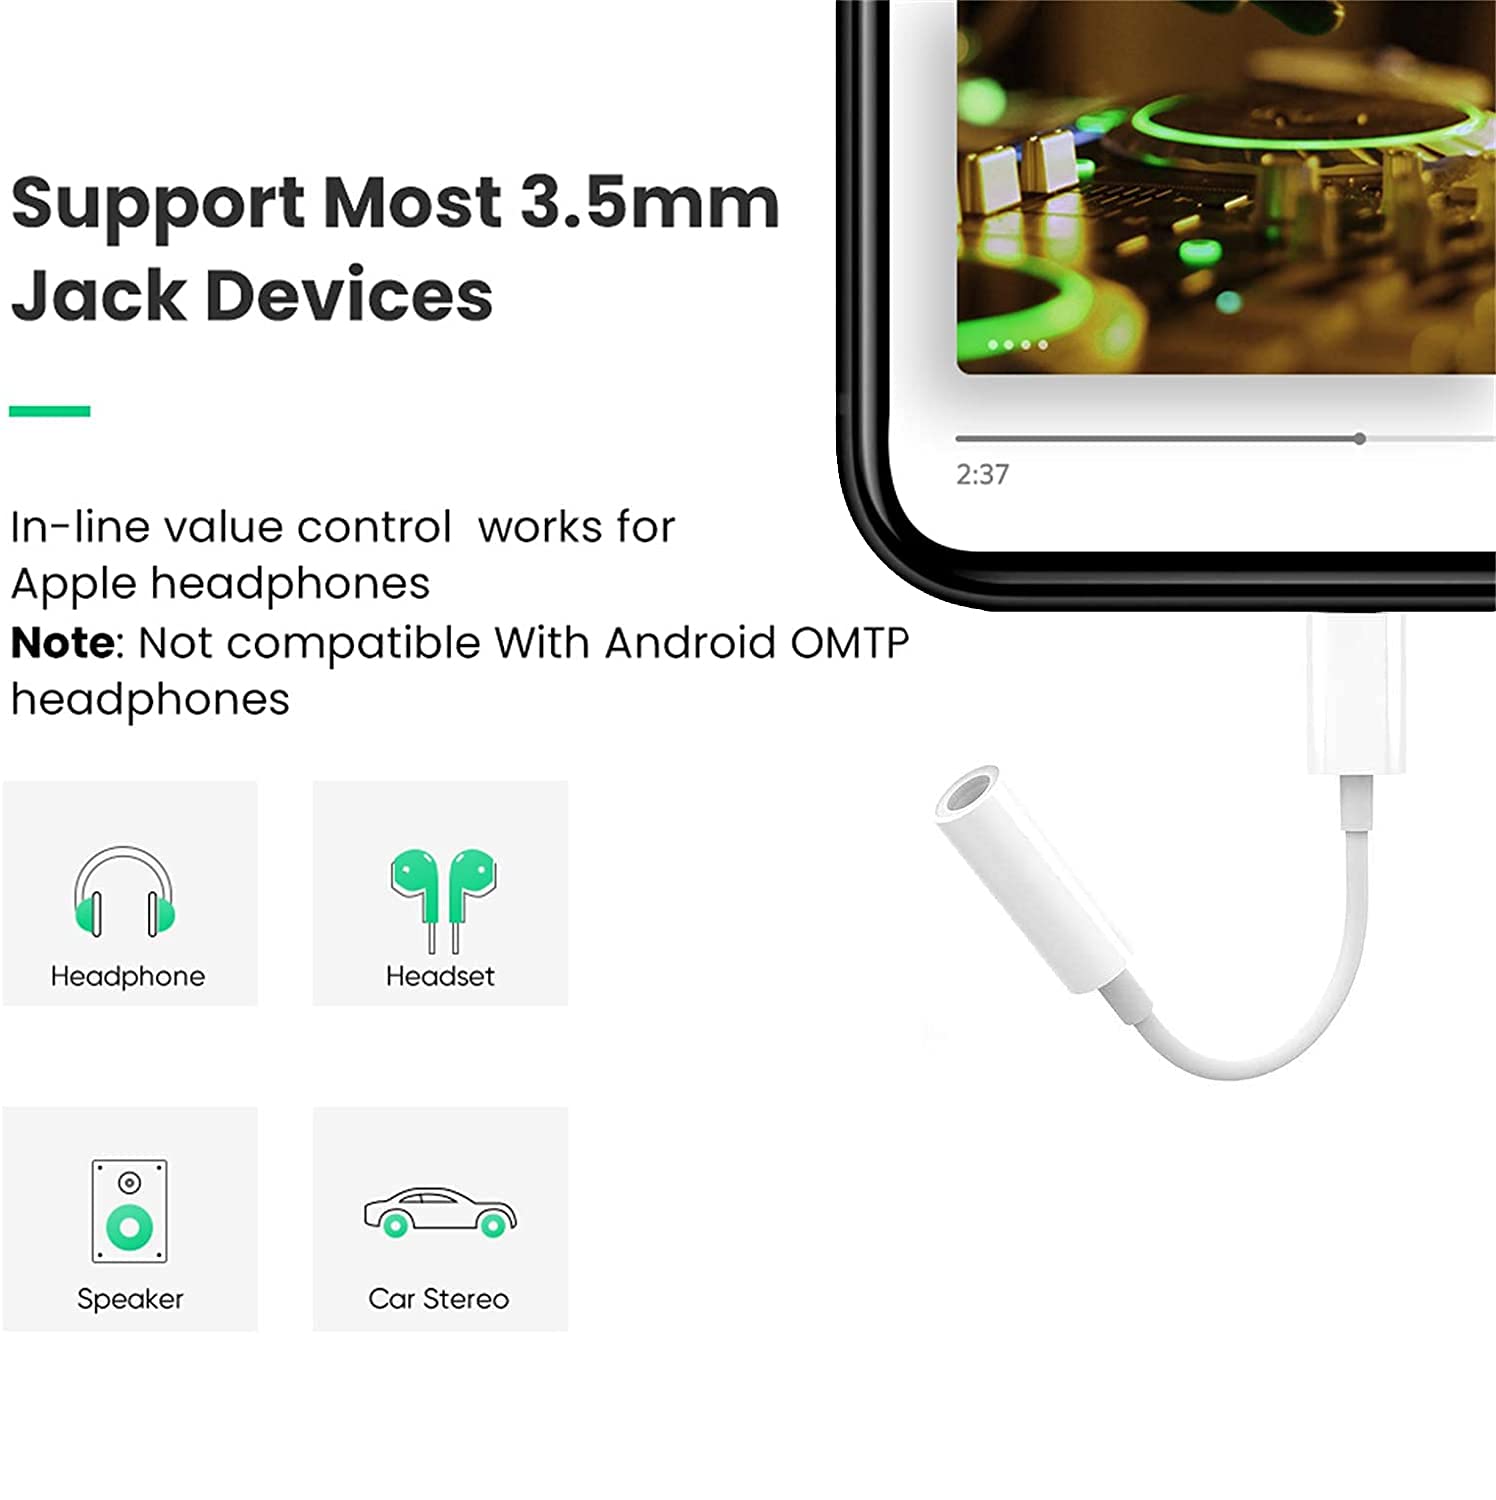 Apple MFi Certified 3 Pack Headphone Adapter for iPhone Connects Lightning to 3.5mm Dongle Auxiliary Audio Splitter Cable AKAVO Adapter Compatible with iPhone 7 8 11 11 Pro 12 12 Pro X XR XS XS Max